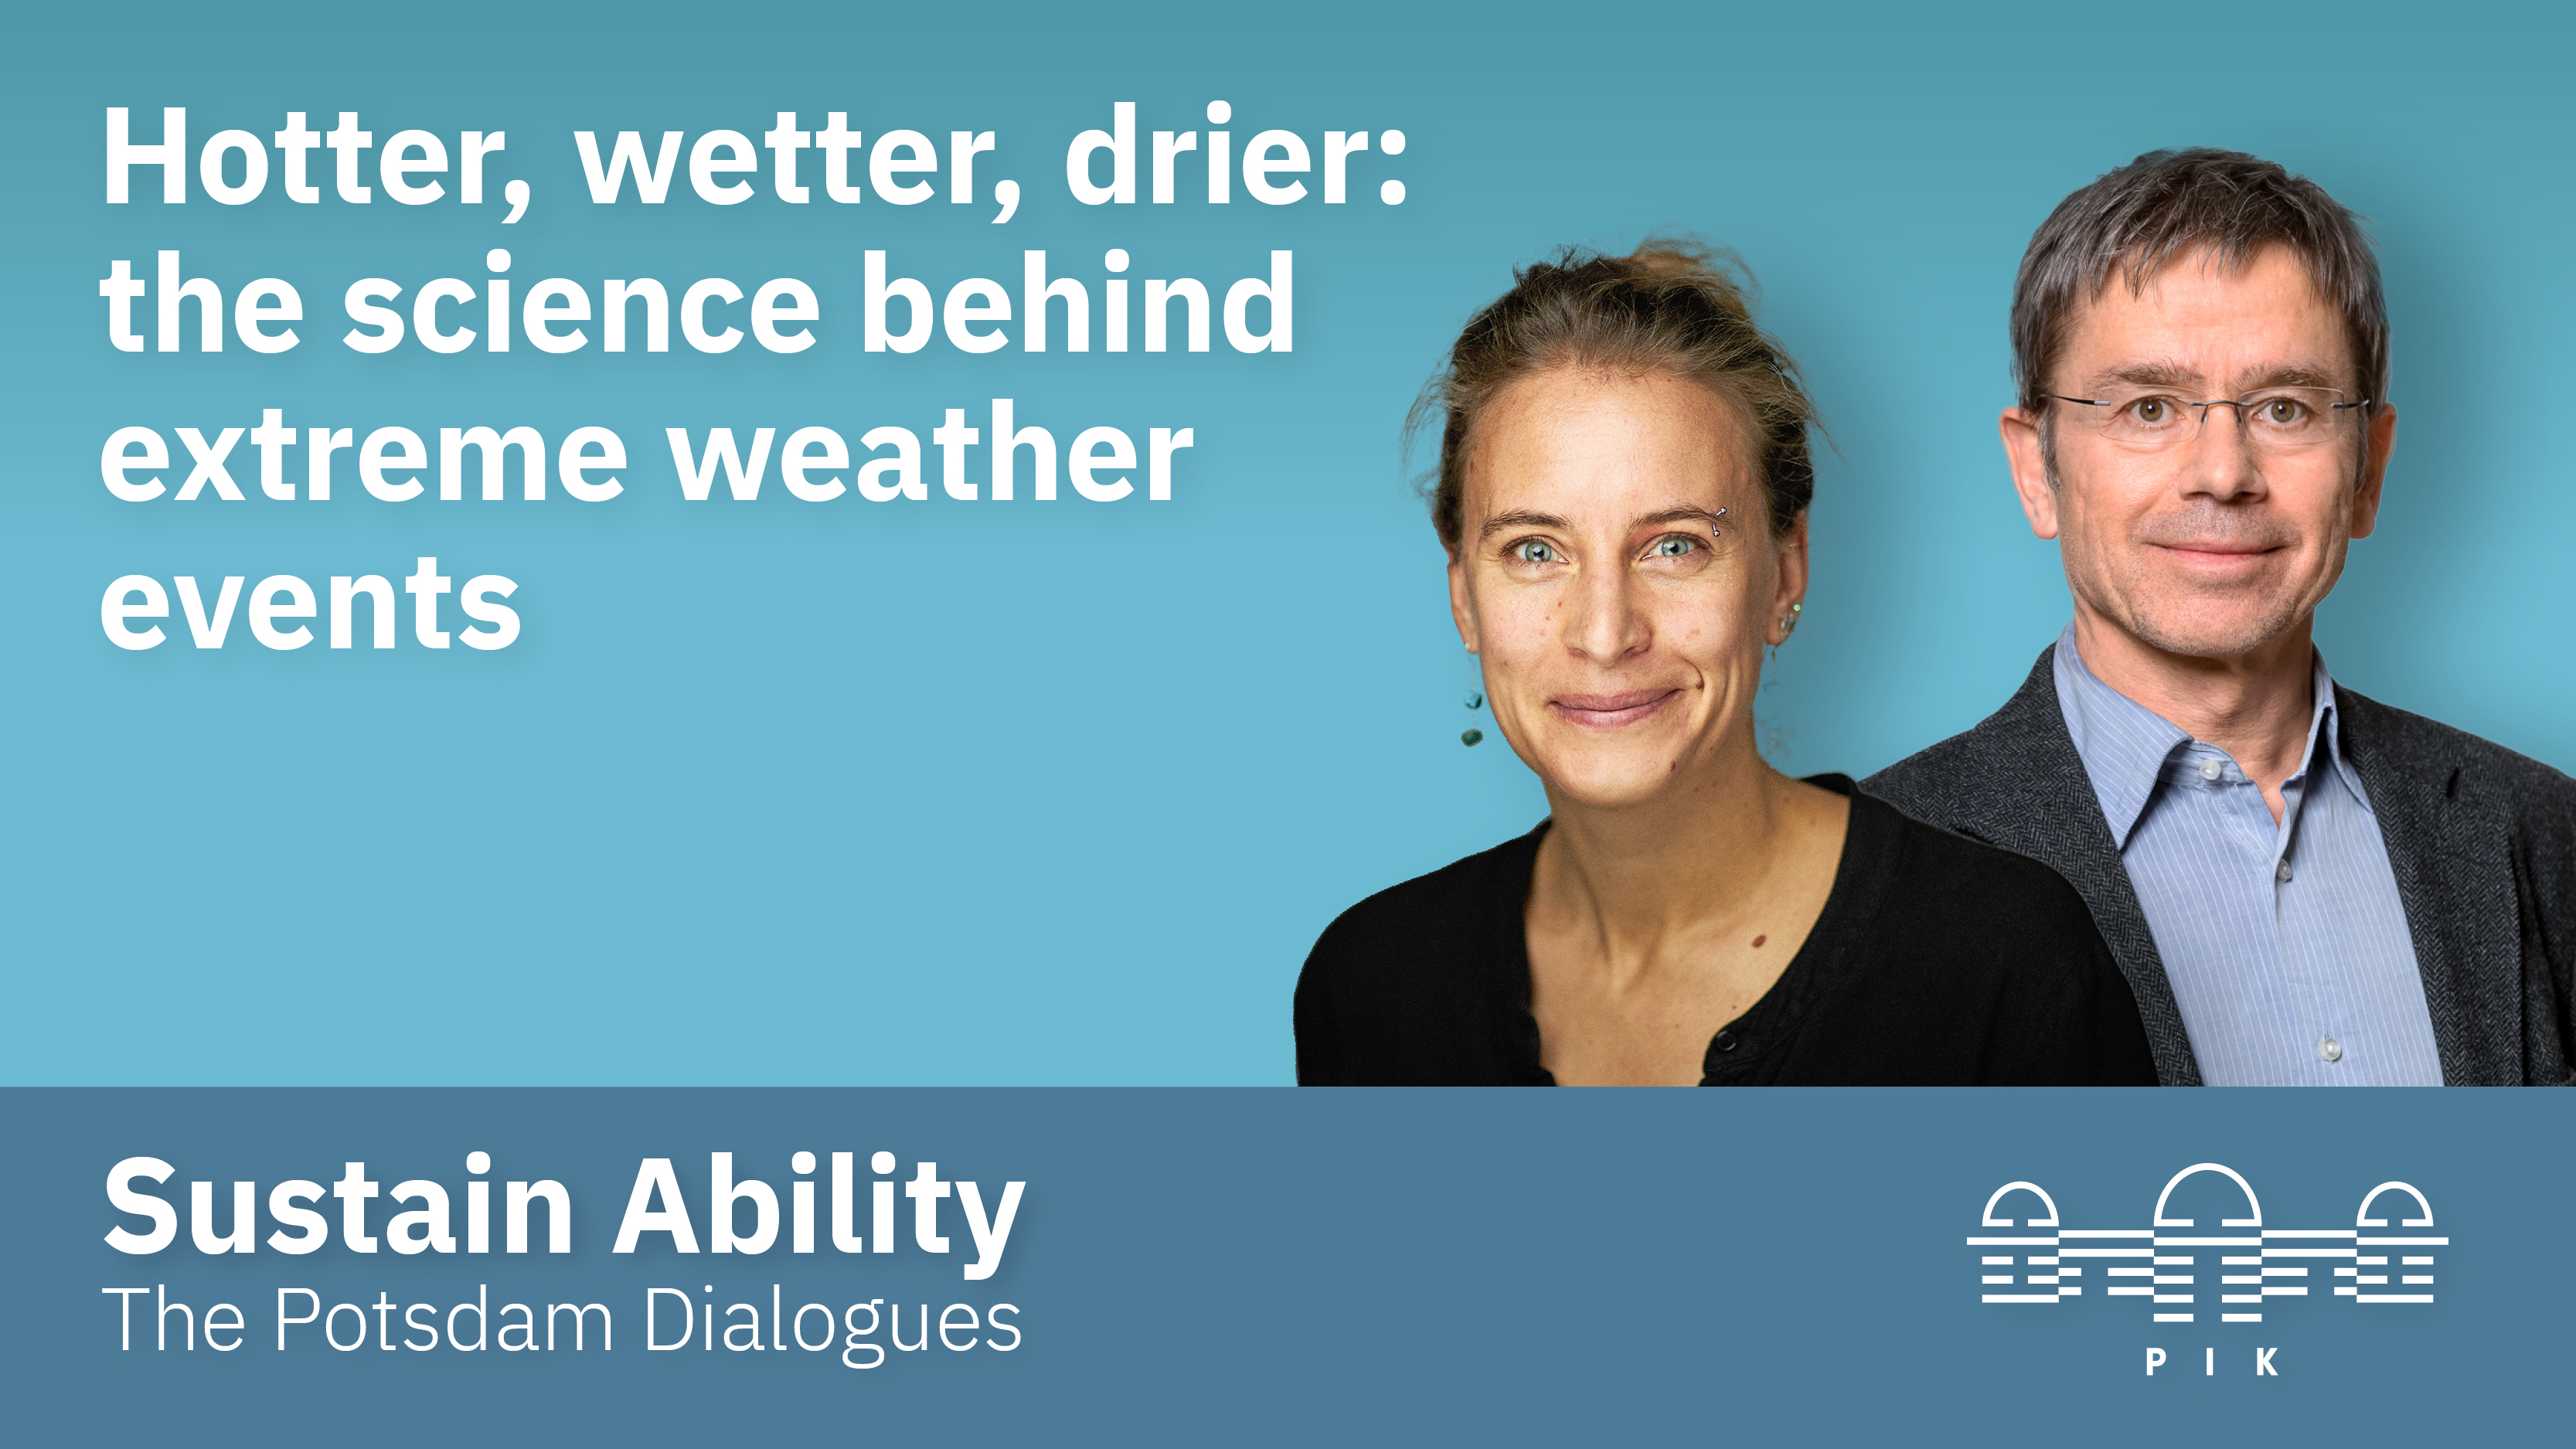 Sustain Ability. The Potsdam Dialogues - Science for a Safe Tomorrow. Episode 2: Die Wissenschaft hinter Extremwetter-Ereignissen